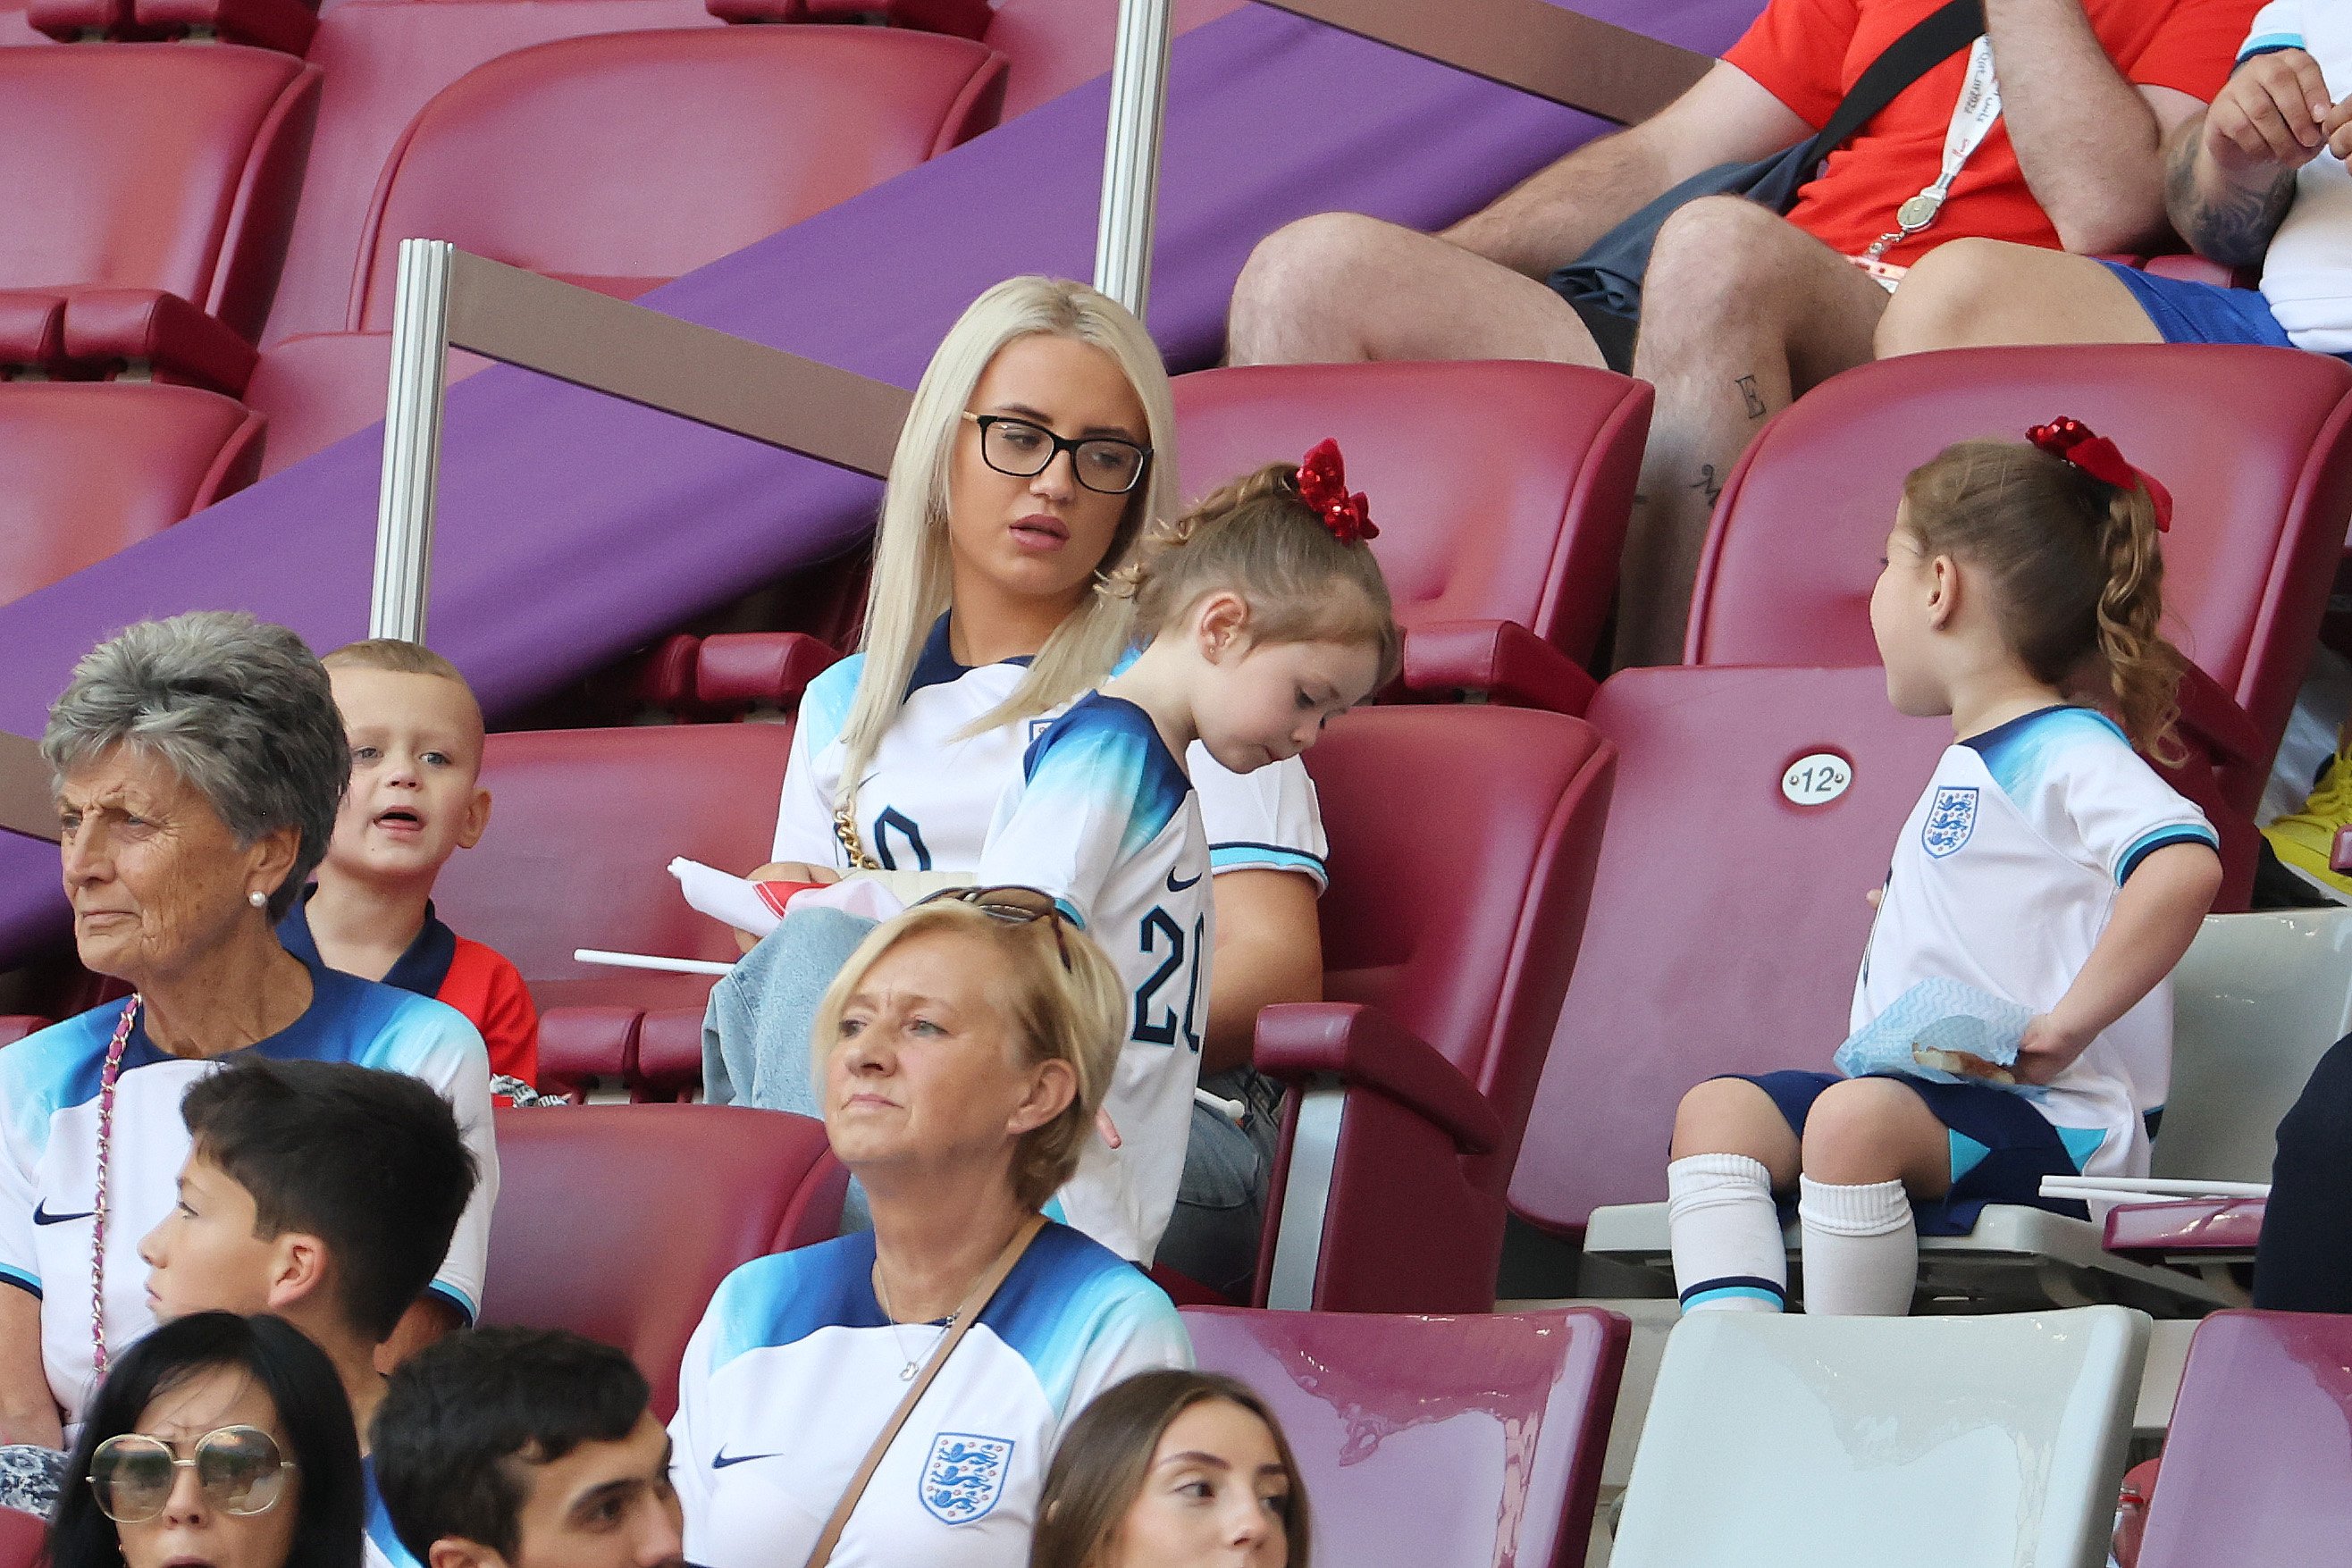 Rebecca Cooke at the FIFA World Cup Qatar 2022 Group B match between England and IR Iran on November 21, 2022, in Doha, Qatar. | Source: Getty Images